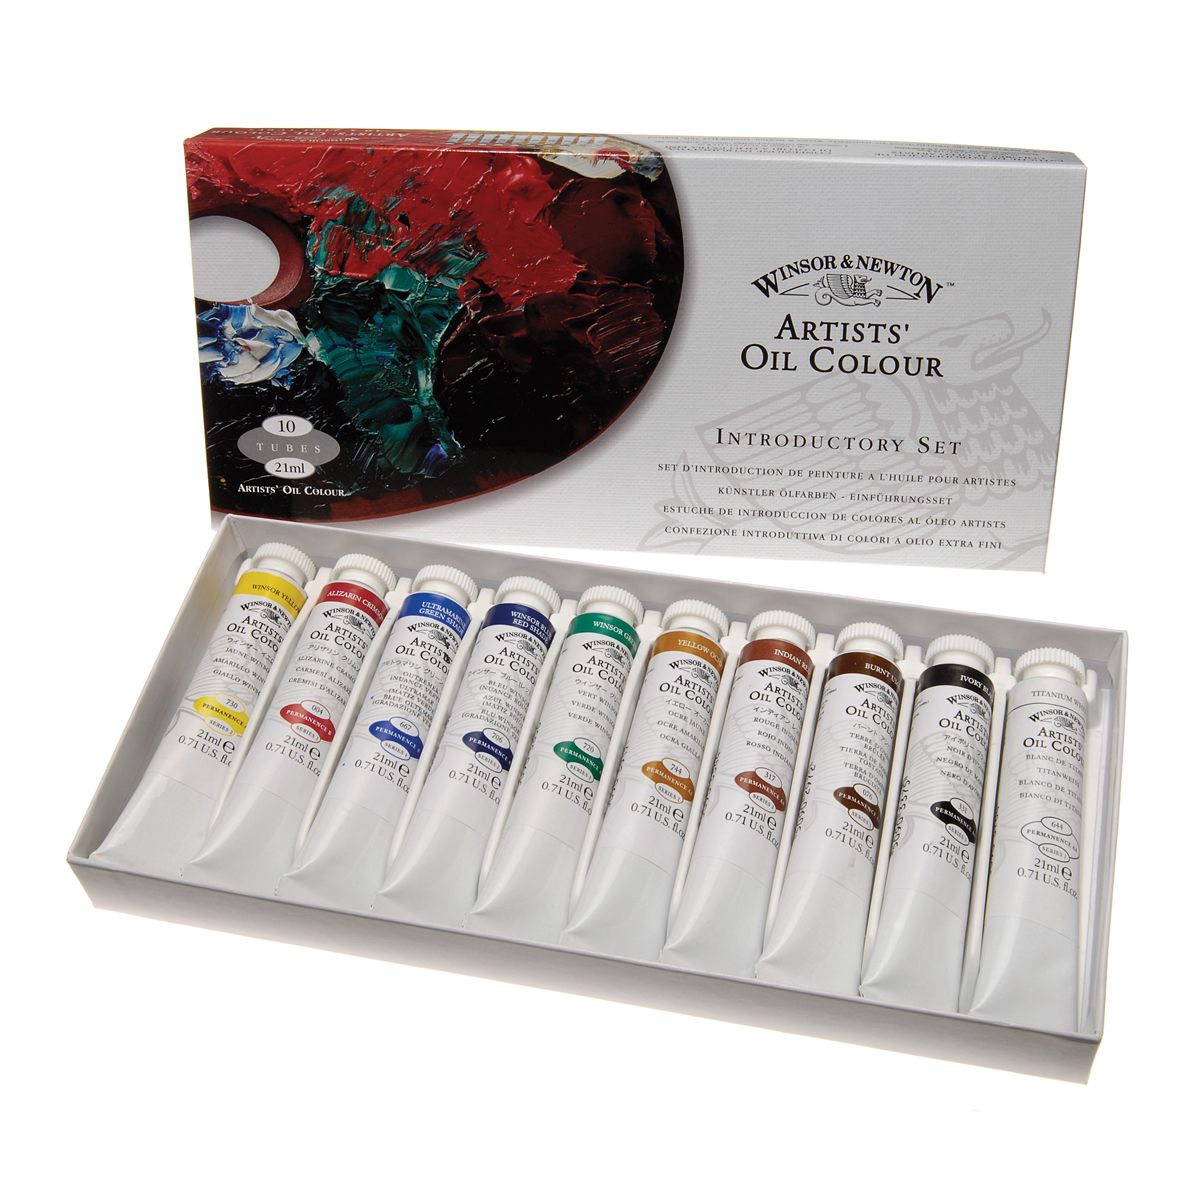 Winsor & Newton Artists' Oil Colour is unmatched for its purity, quality and reliability  Winsor & Newton Professional Artist Oil set 10 colours x 21 ml This introductory set contains 10 x 21ml tubes of the popular Winsor & Newton Artist Quality Oil Colour.  A typical selection includes Winsor Yellow, Alizarin Crimson, Ultramarine (Green Shade), Winsor Green (Phthalo), Yellow Ochre, Indian Red, Burnt Umber, Ivory Black and Titanium White.